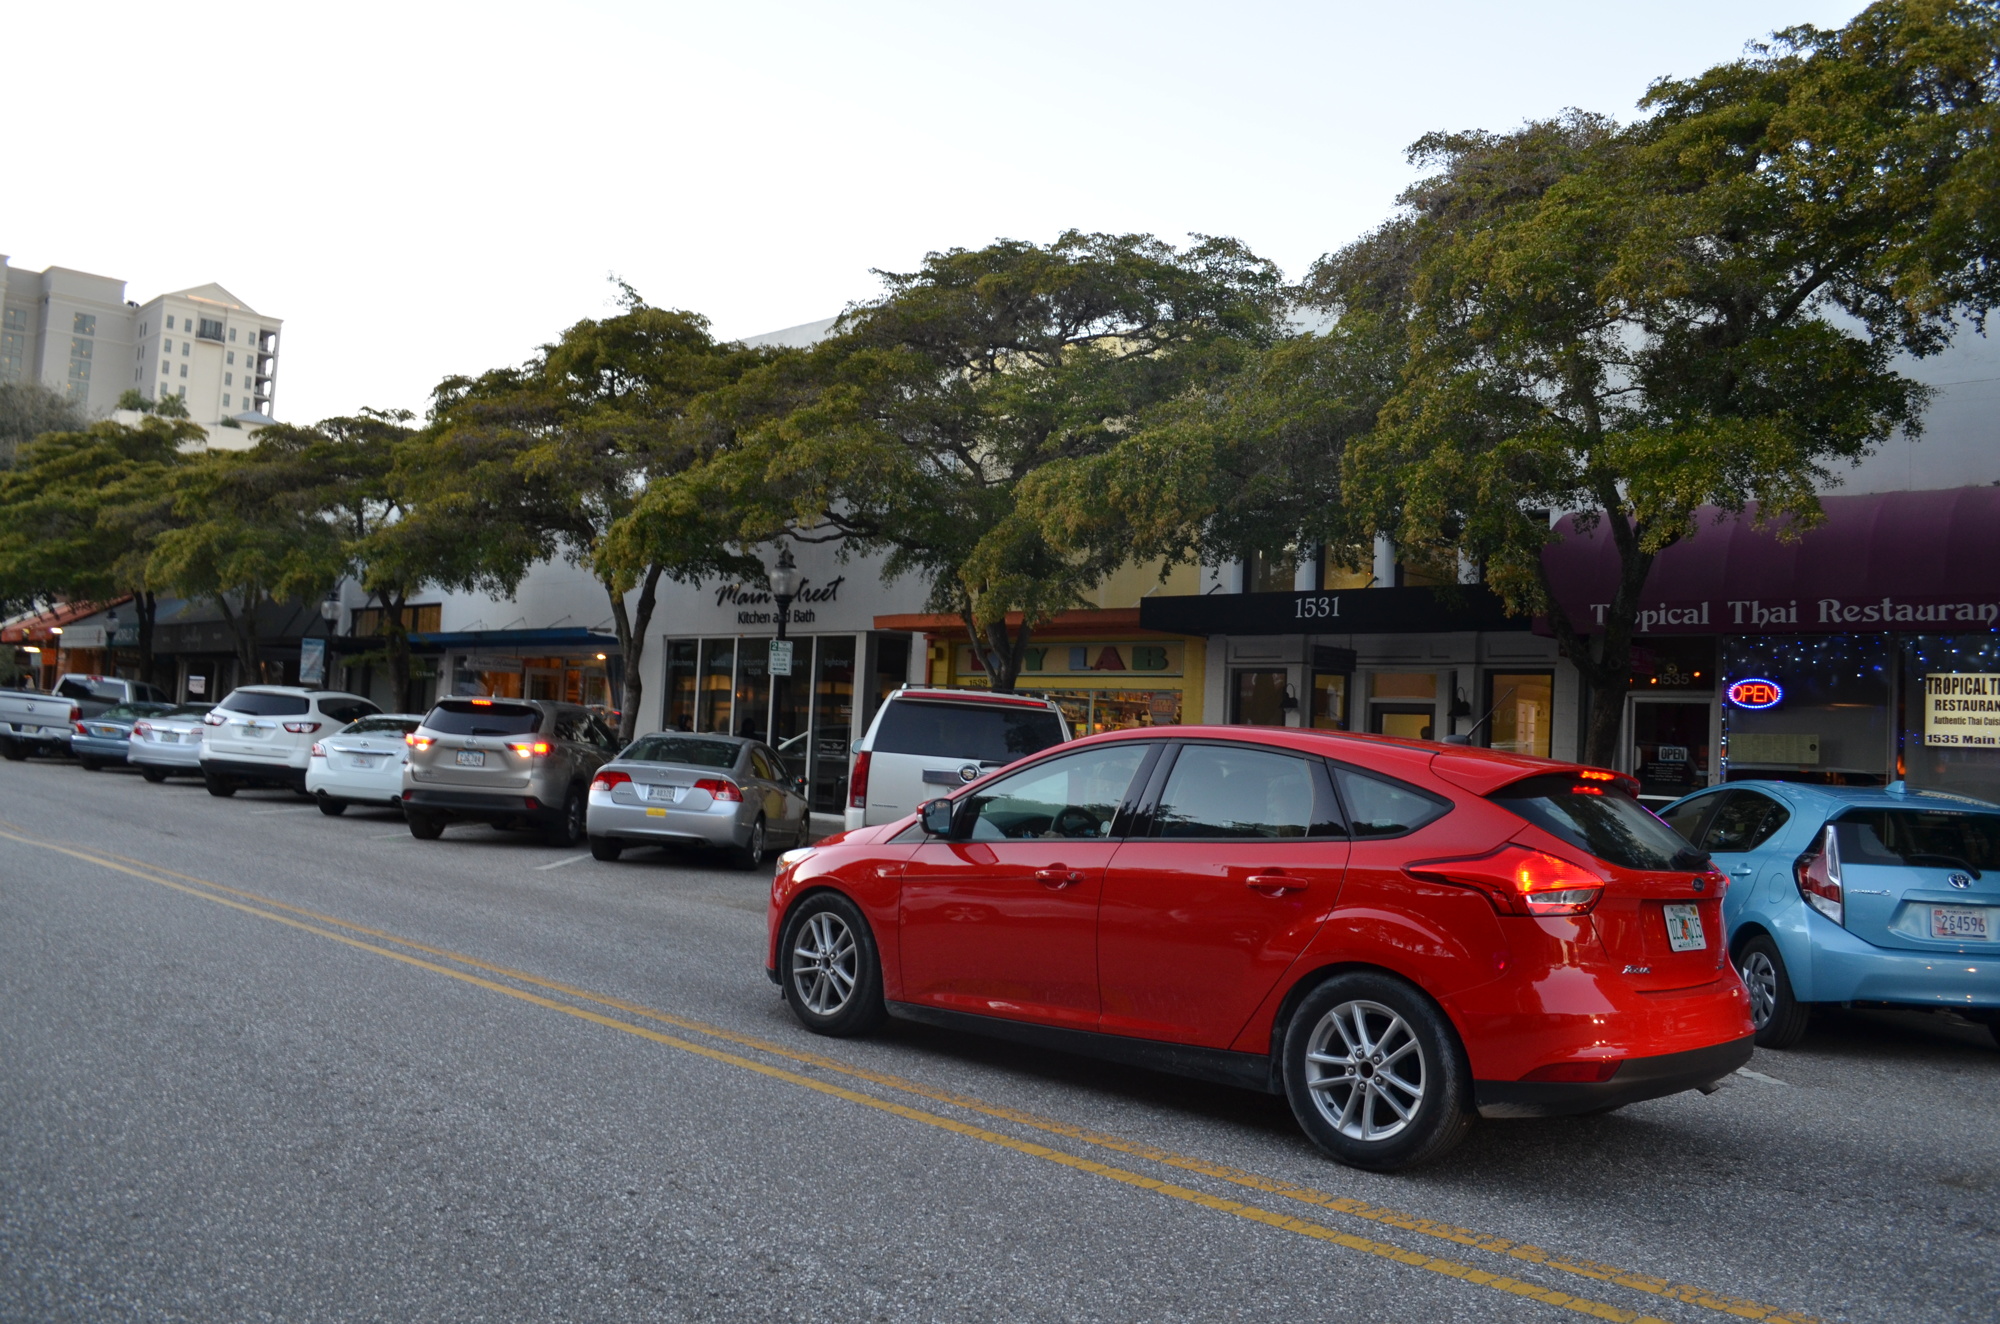 City staff said Main Street is one of the highest-ranking road segments for crashes on a regional level, a problem they attributed in part to angled parking.